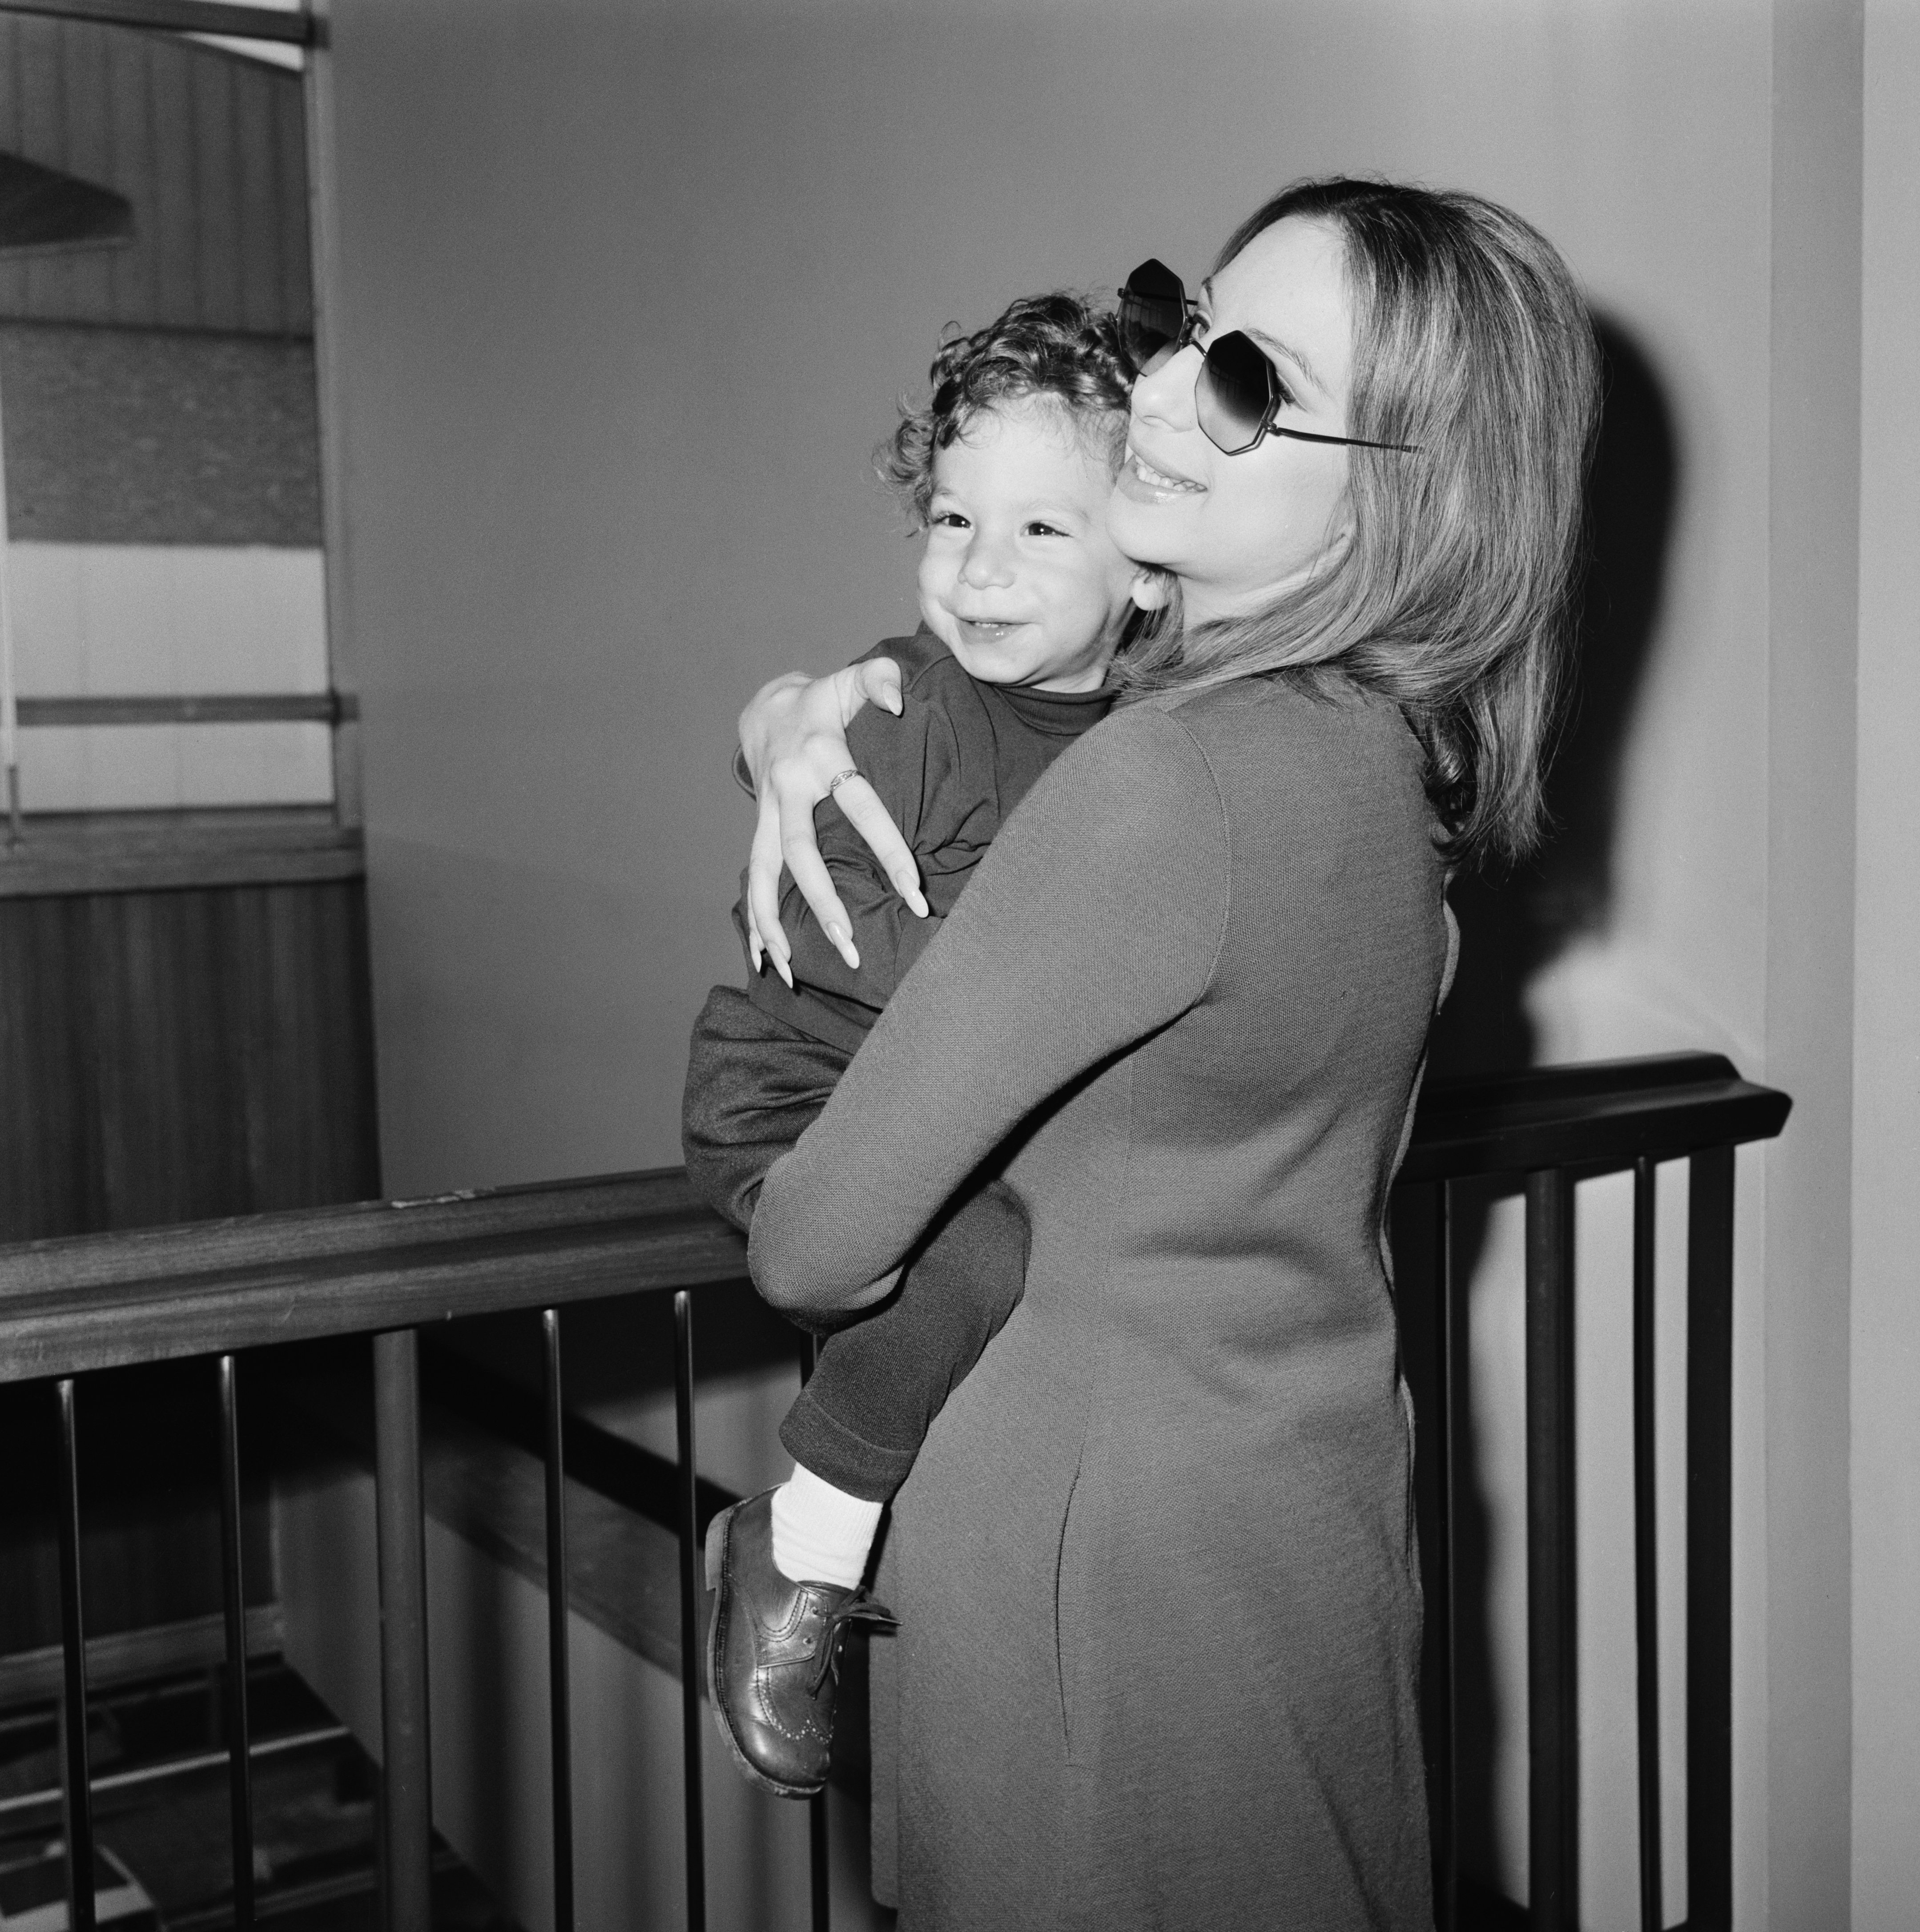 Us actress and singer, Barbra Streisand with her son Jason Gould at Heathrow Airport UK on April 11, 1969. | Source: Getty Images